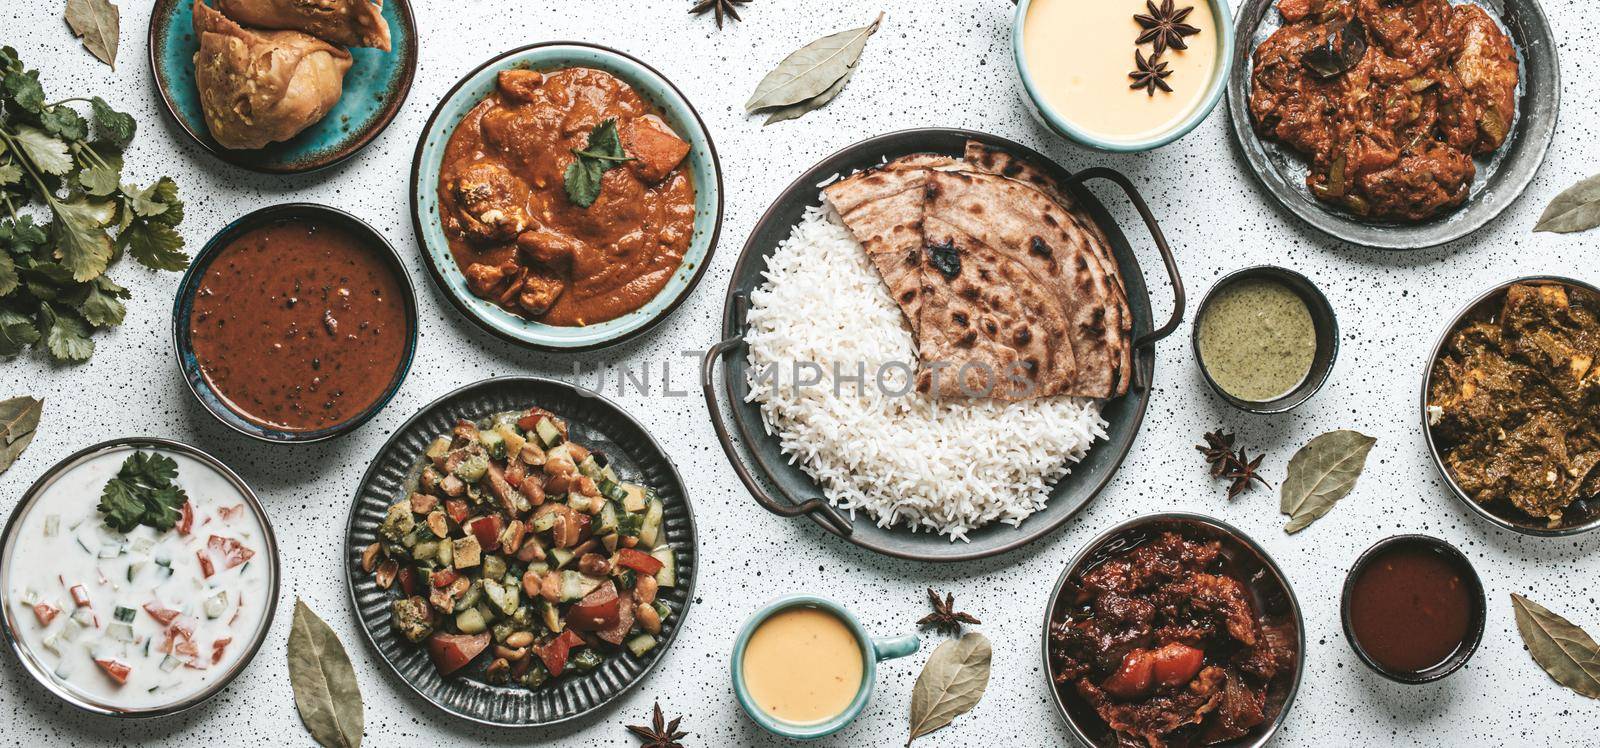 Indian ethnic food buffet on white concrete table from above by its_al_dente